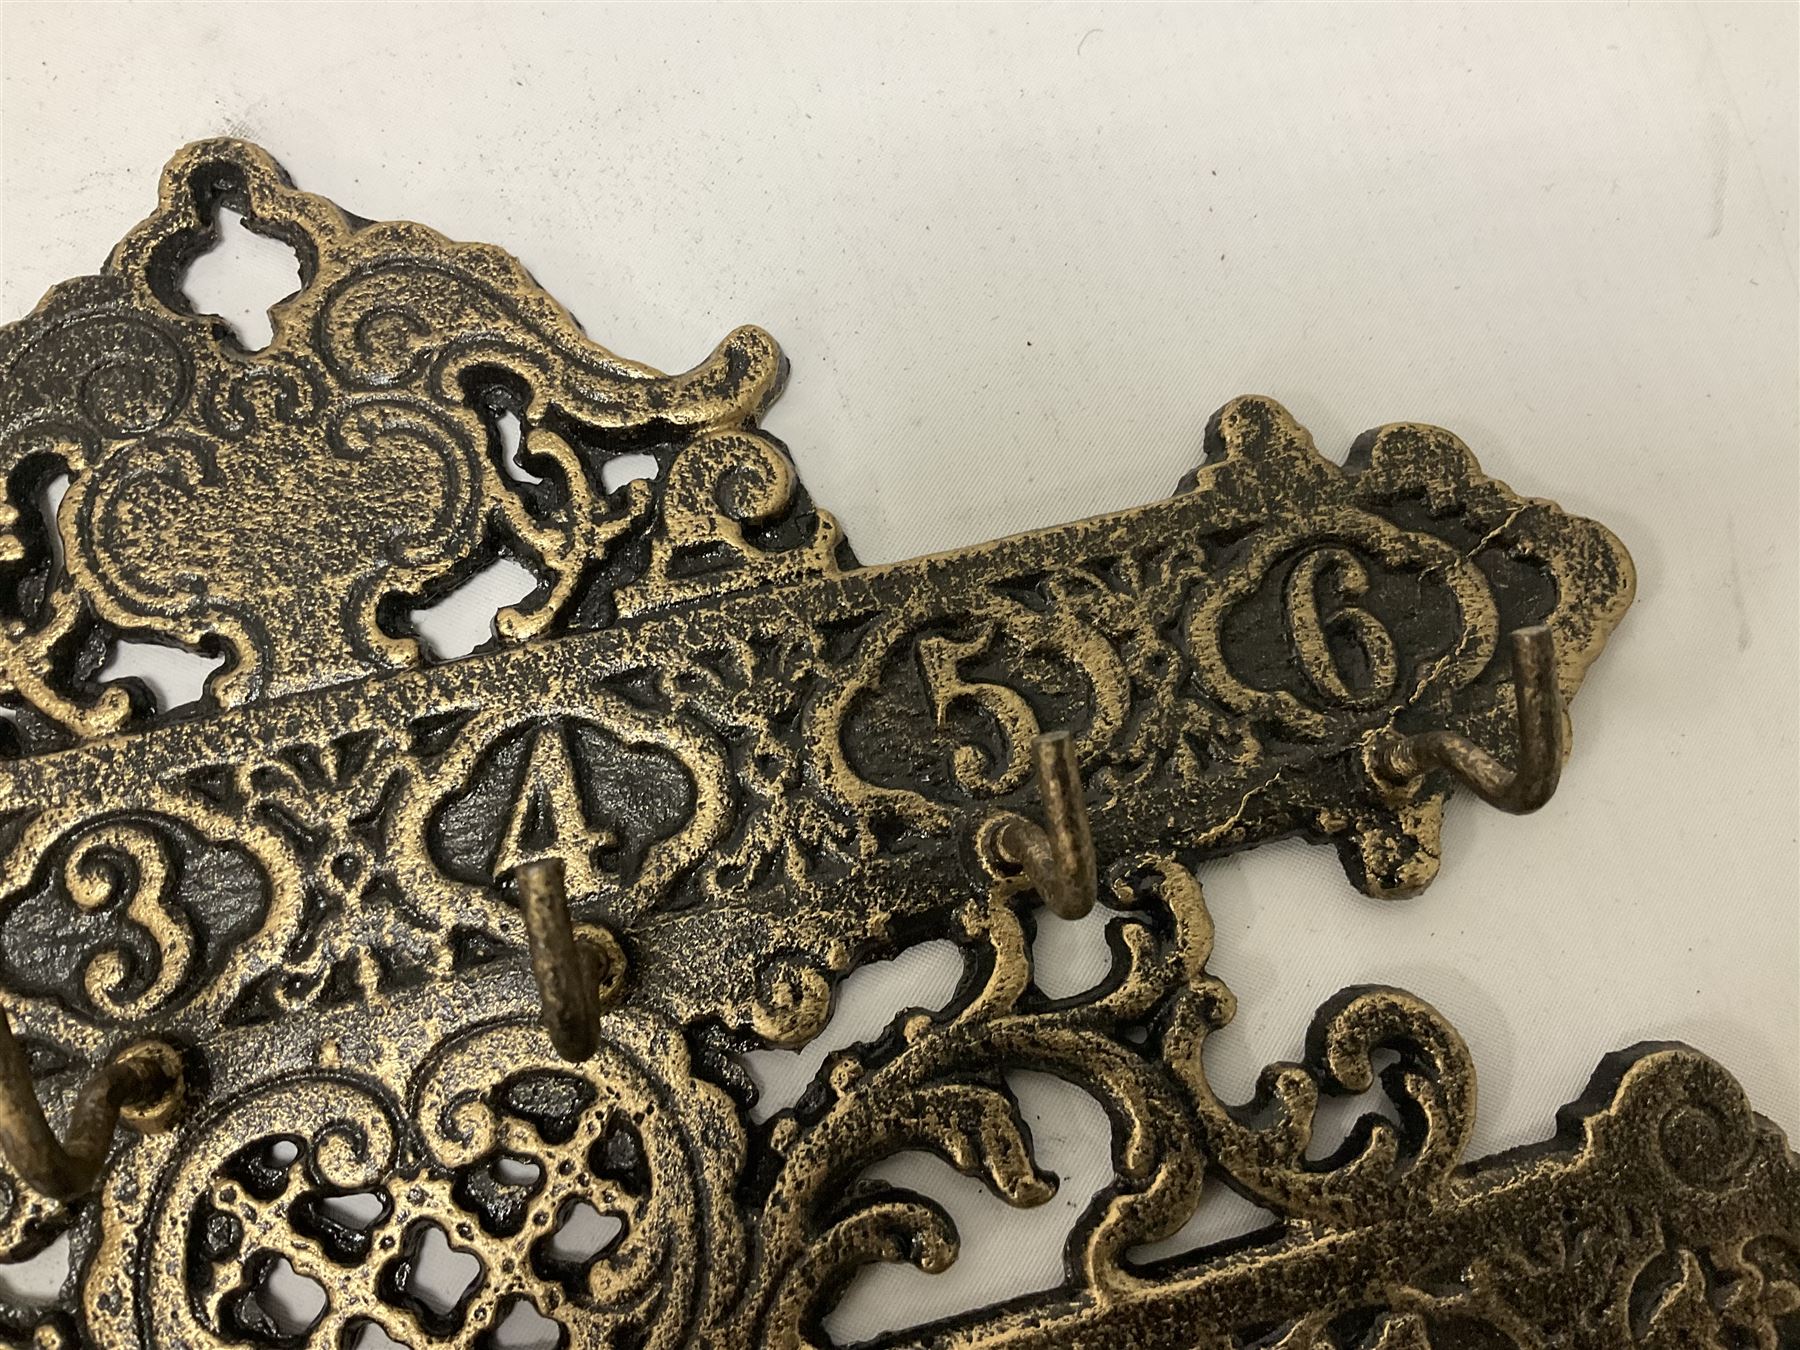 Bronzed cast metal numbered key rack of pierced and scrolled design - Image 2 of 6